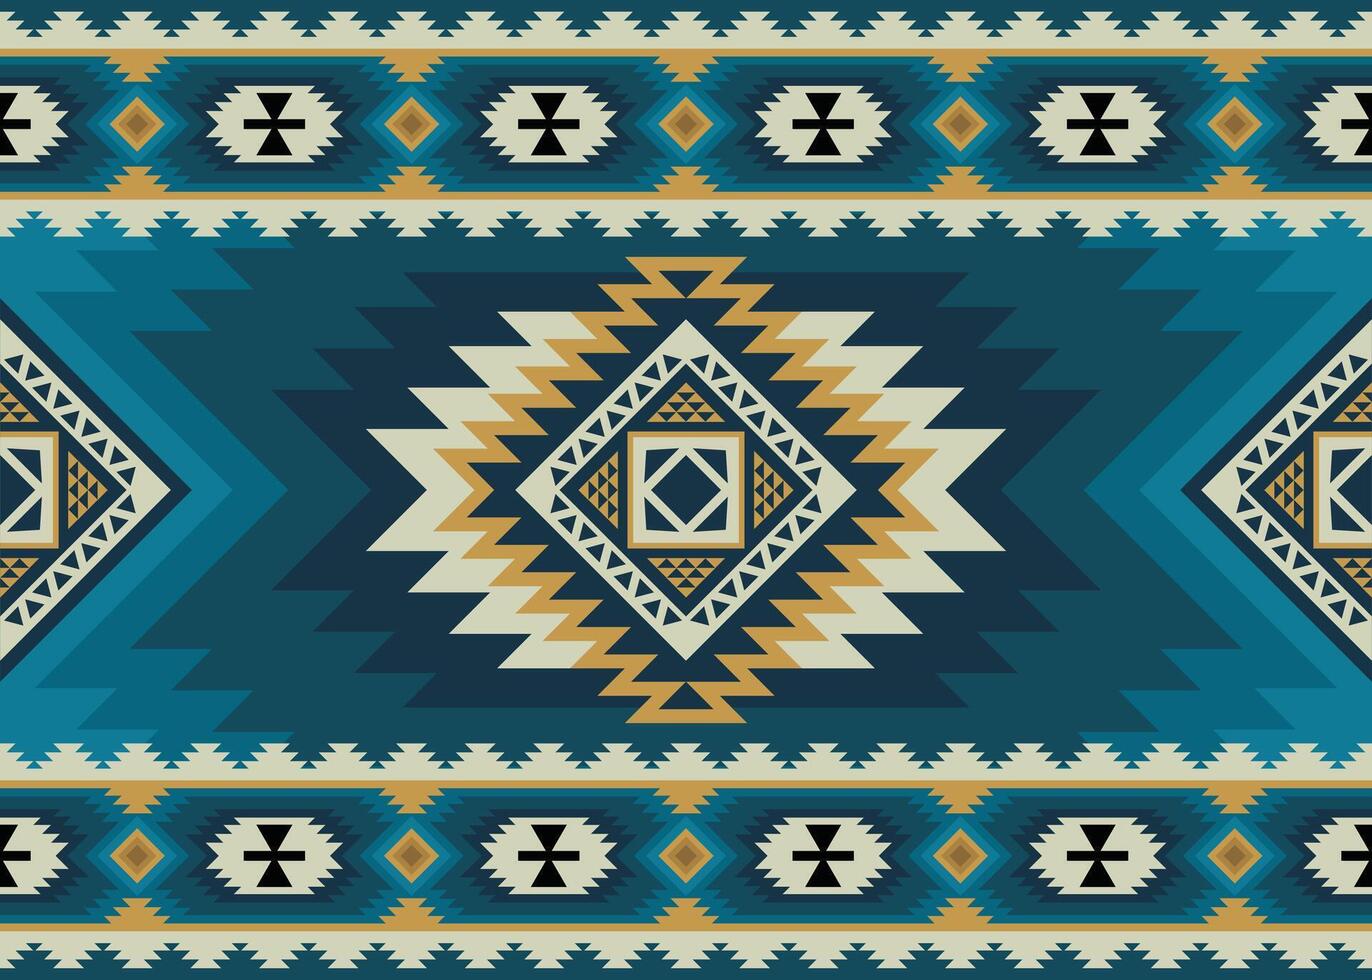 Aztec tribal geometric ethnic seamless pattern. Vintage Native American ethnic vector background. Traditional ornament retro style. Design textile, fabric, clothing, curtain, rug, ornament, wrapping.